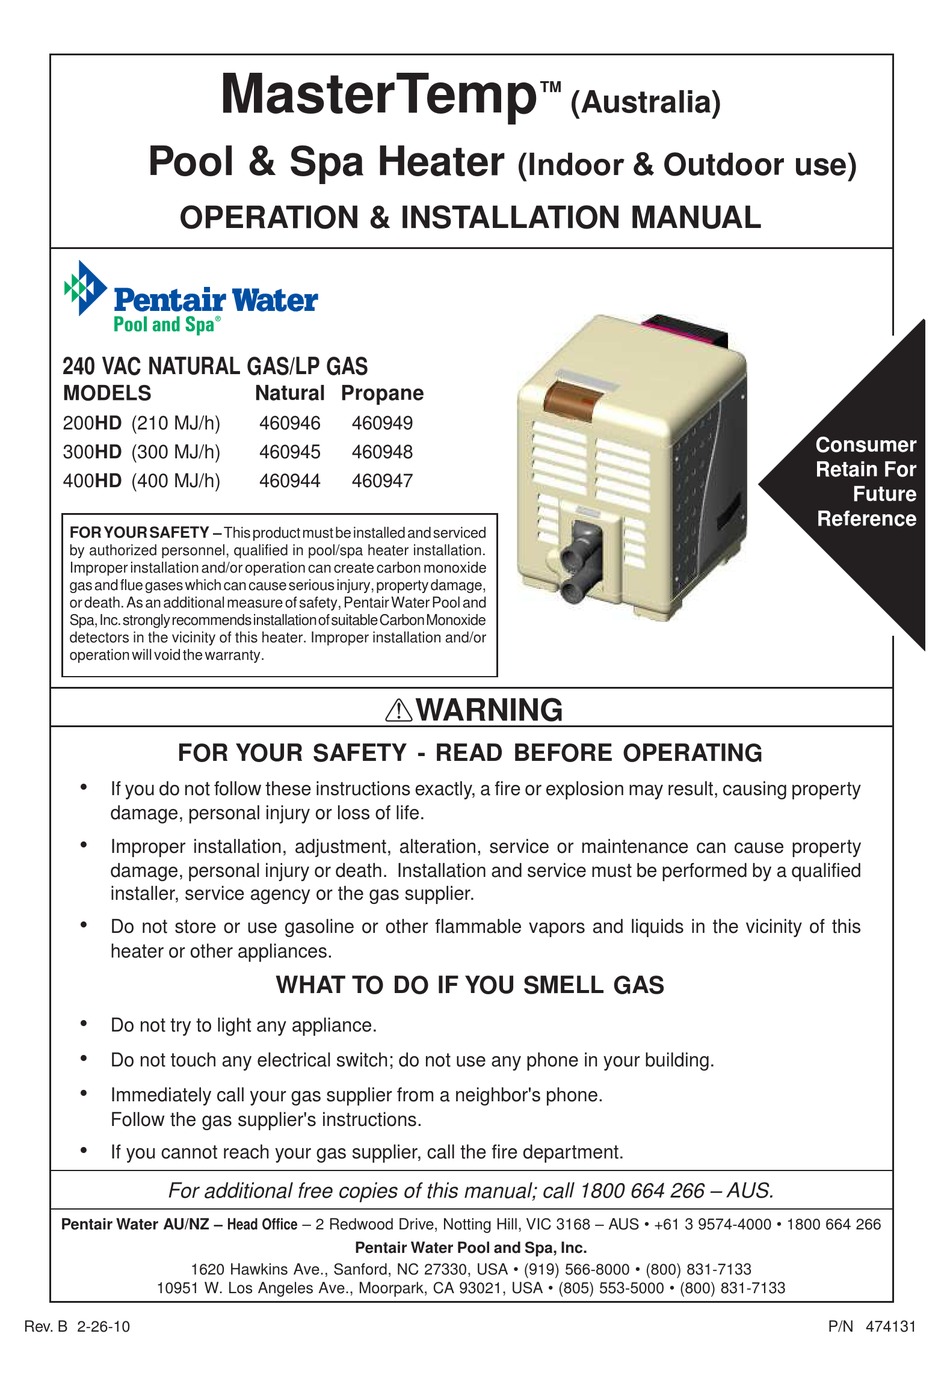 PENTAIR POOL PRODUCTS MASTERTEMP 200HD OPERATION & INSTALLATION MANUAL